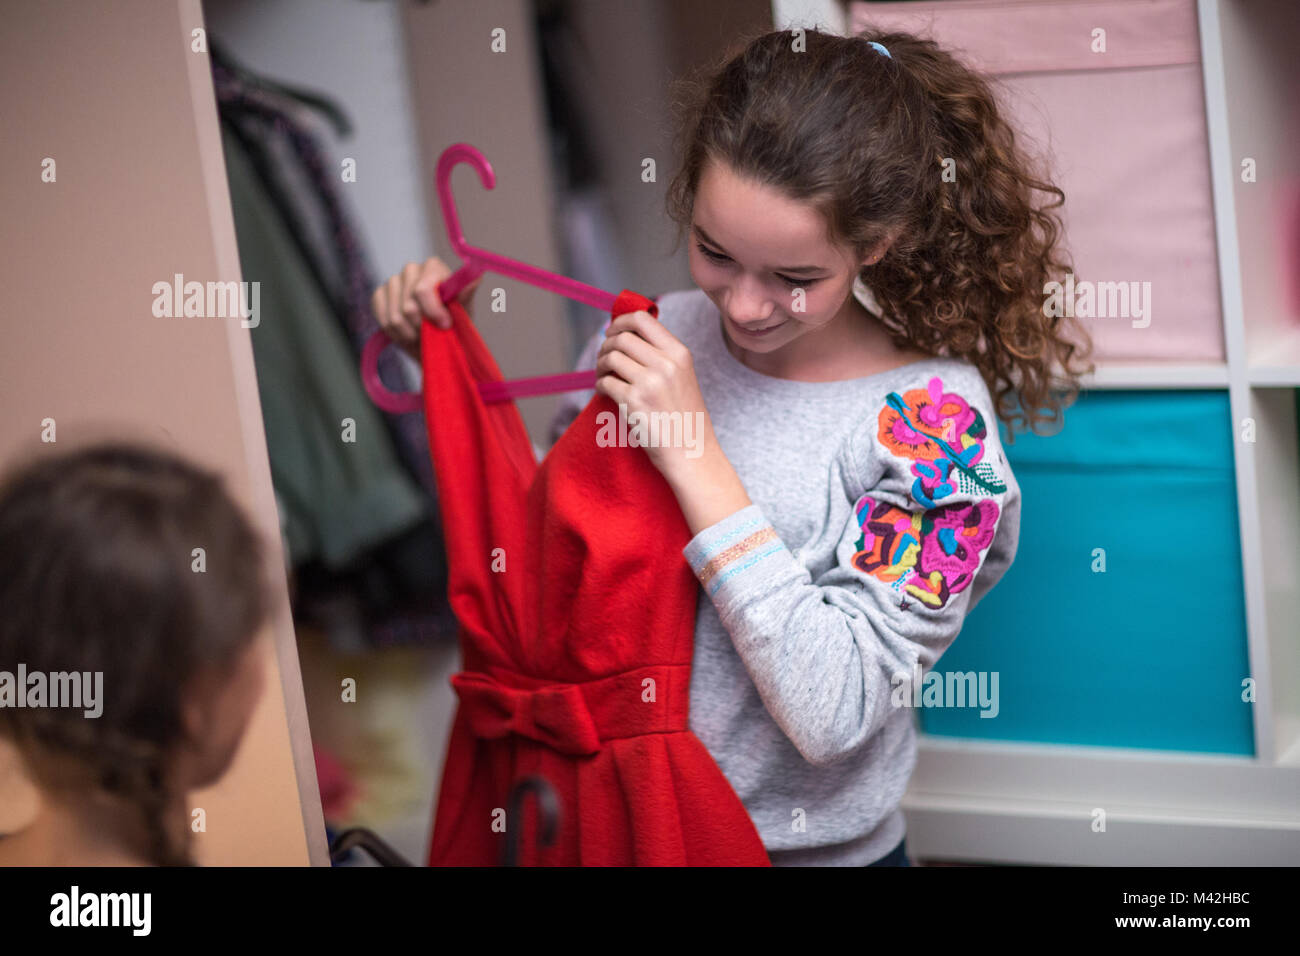 Sisters picking a dress to wear Stock Photo